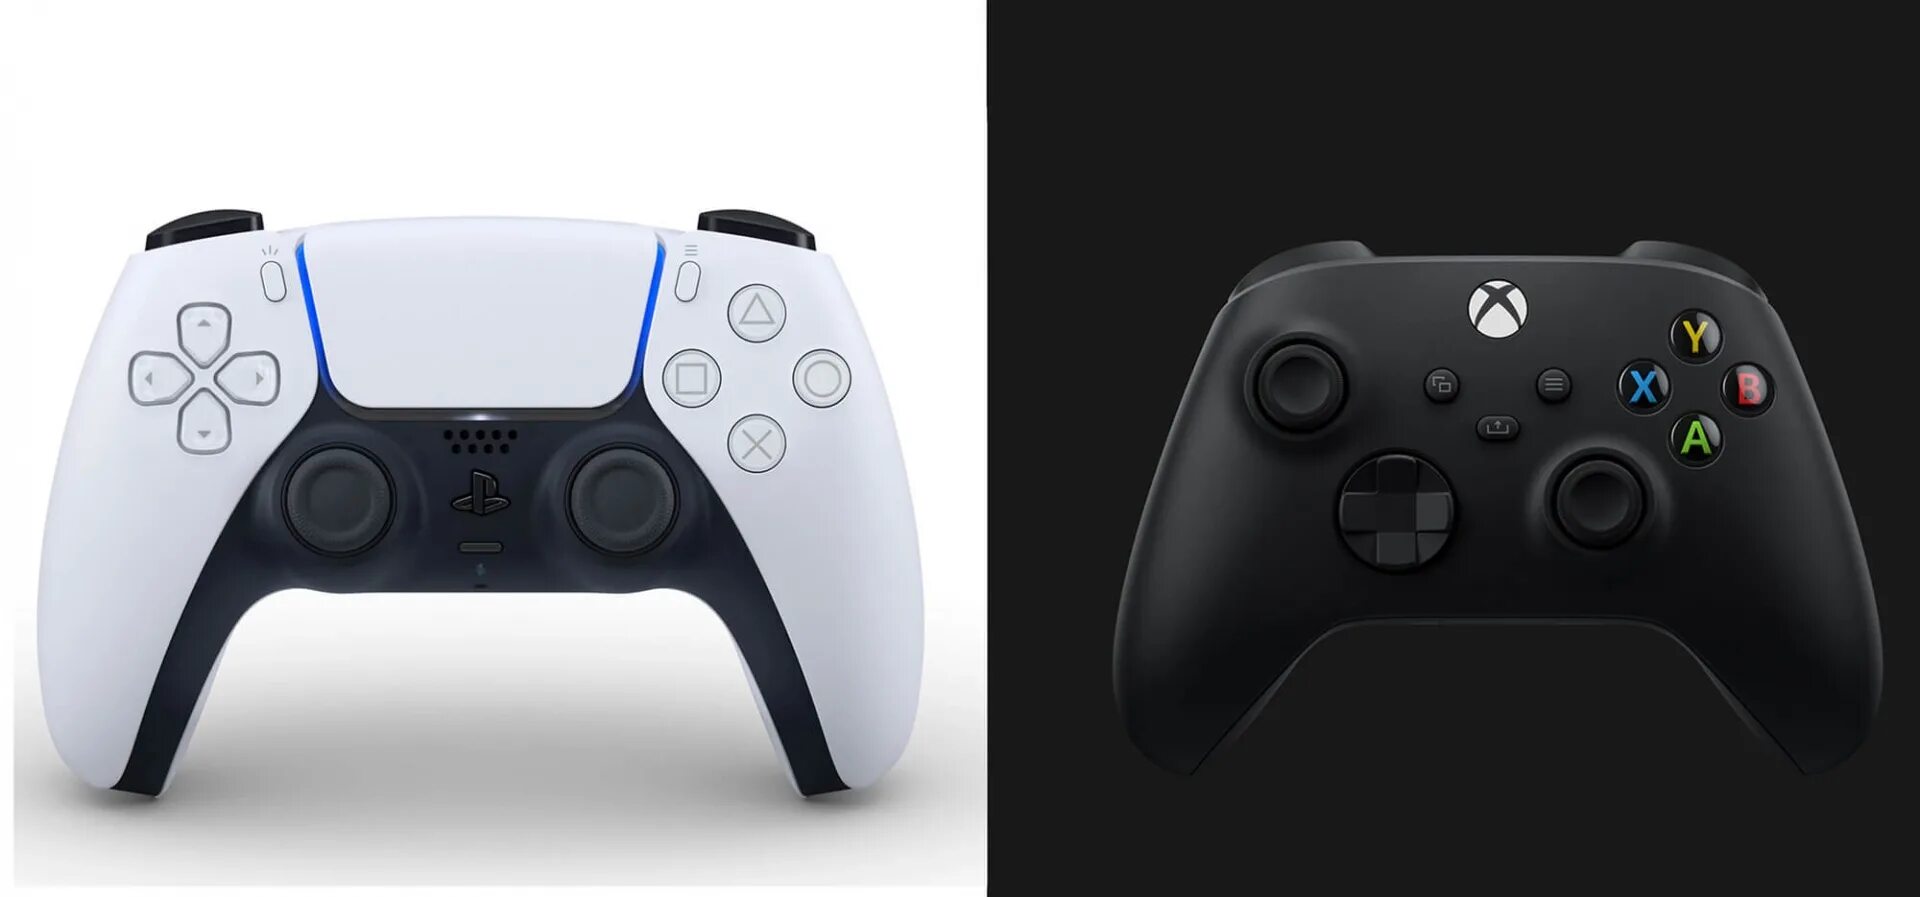 Ps5 vs xbox series. Геймпад ps5 White. Controller PLAYSTATION 5. Геймпад сони плейстейшен 5. Геймпад Sony Xbox ps4.